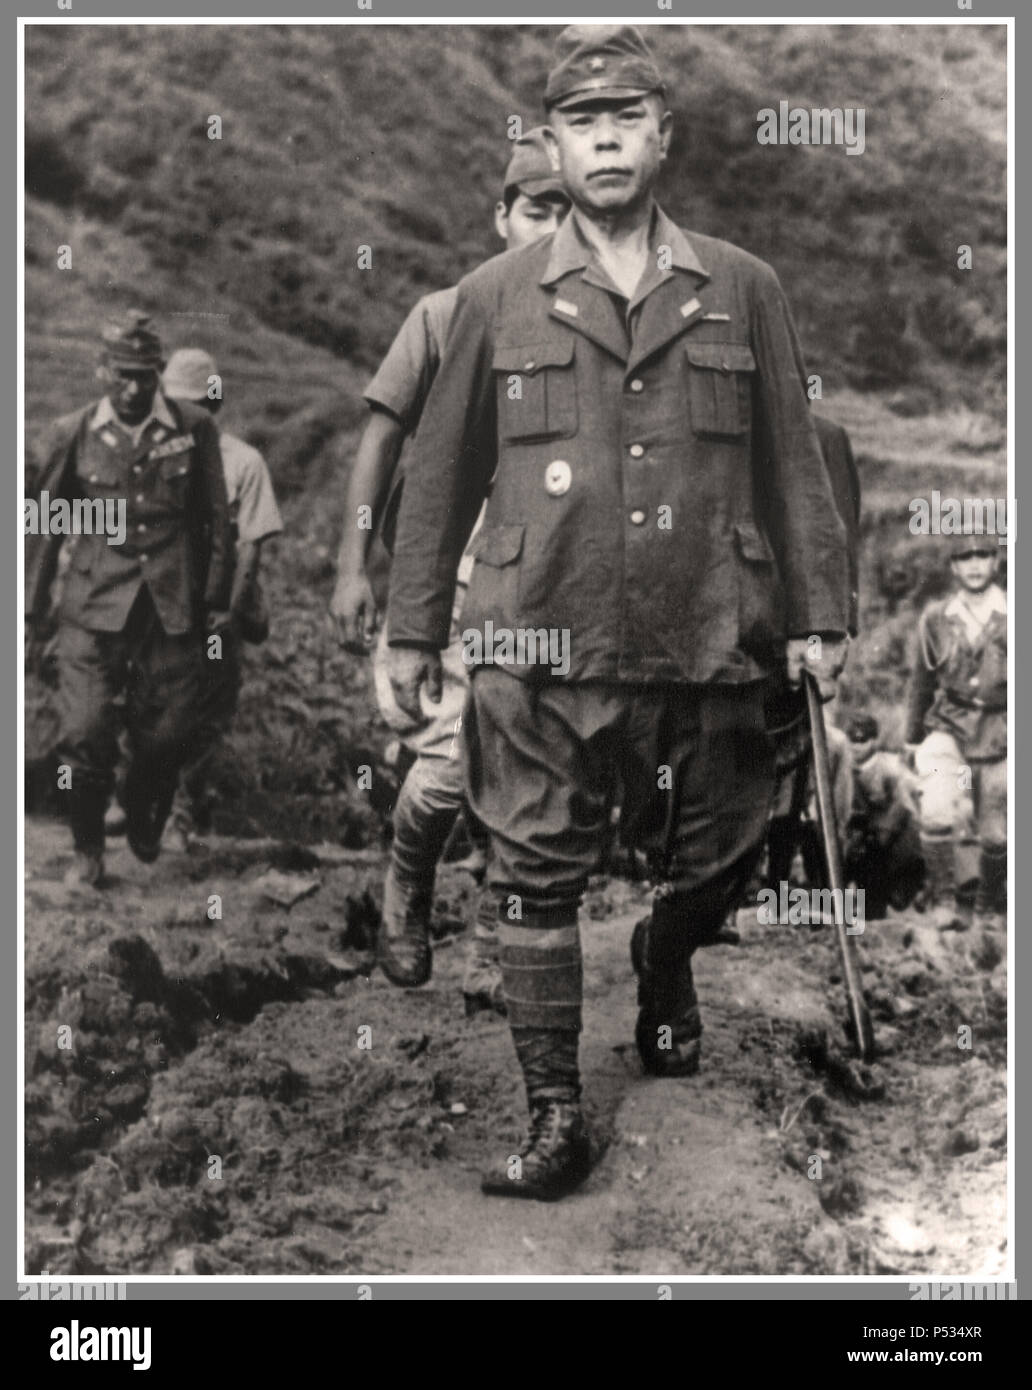 General Yamashita en route to signing the Japanese surrender in the Philippines. He was hanged for war crimes in 1946. Stock Photo